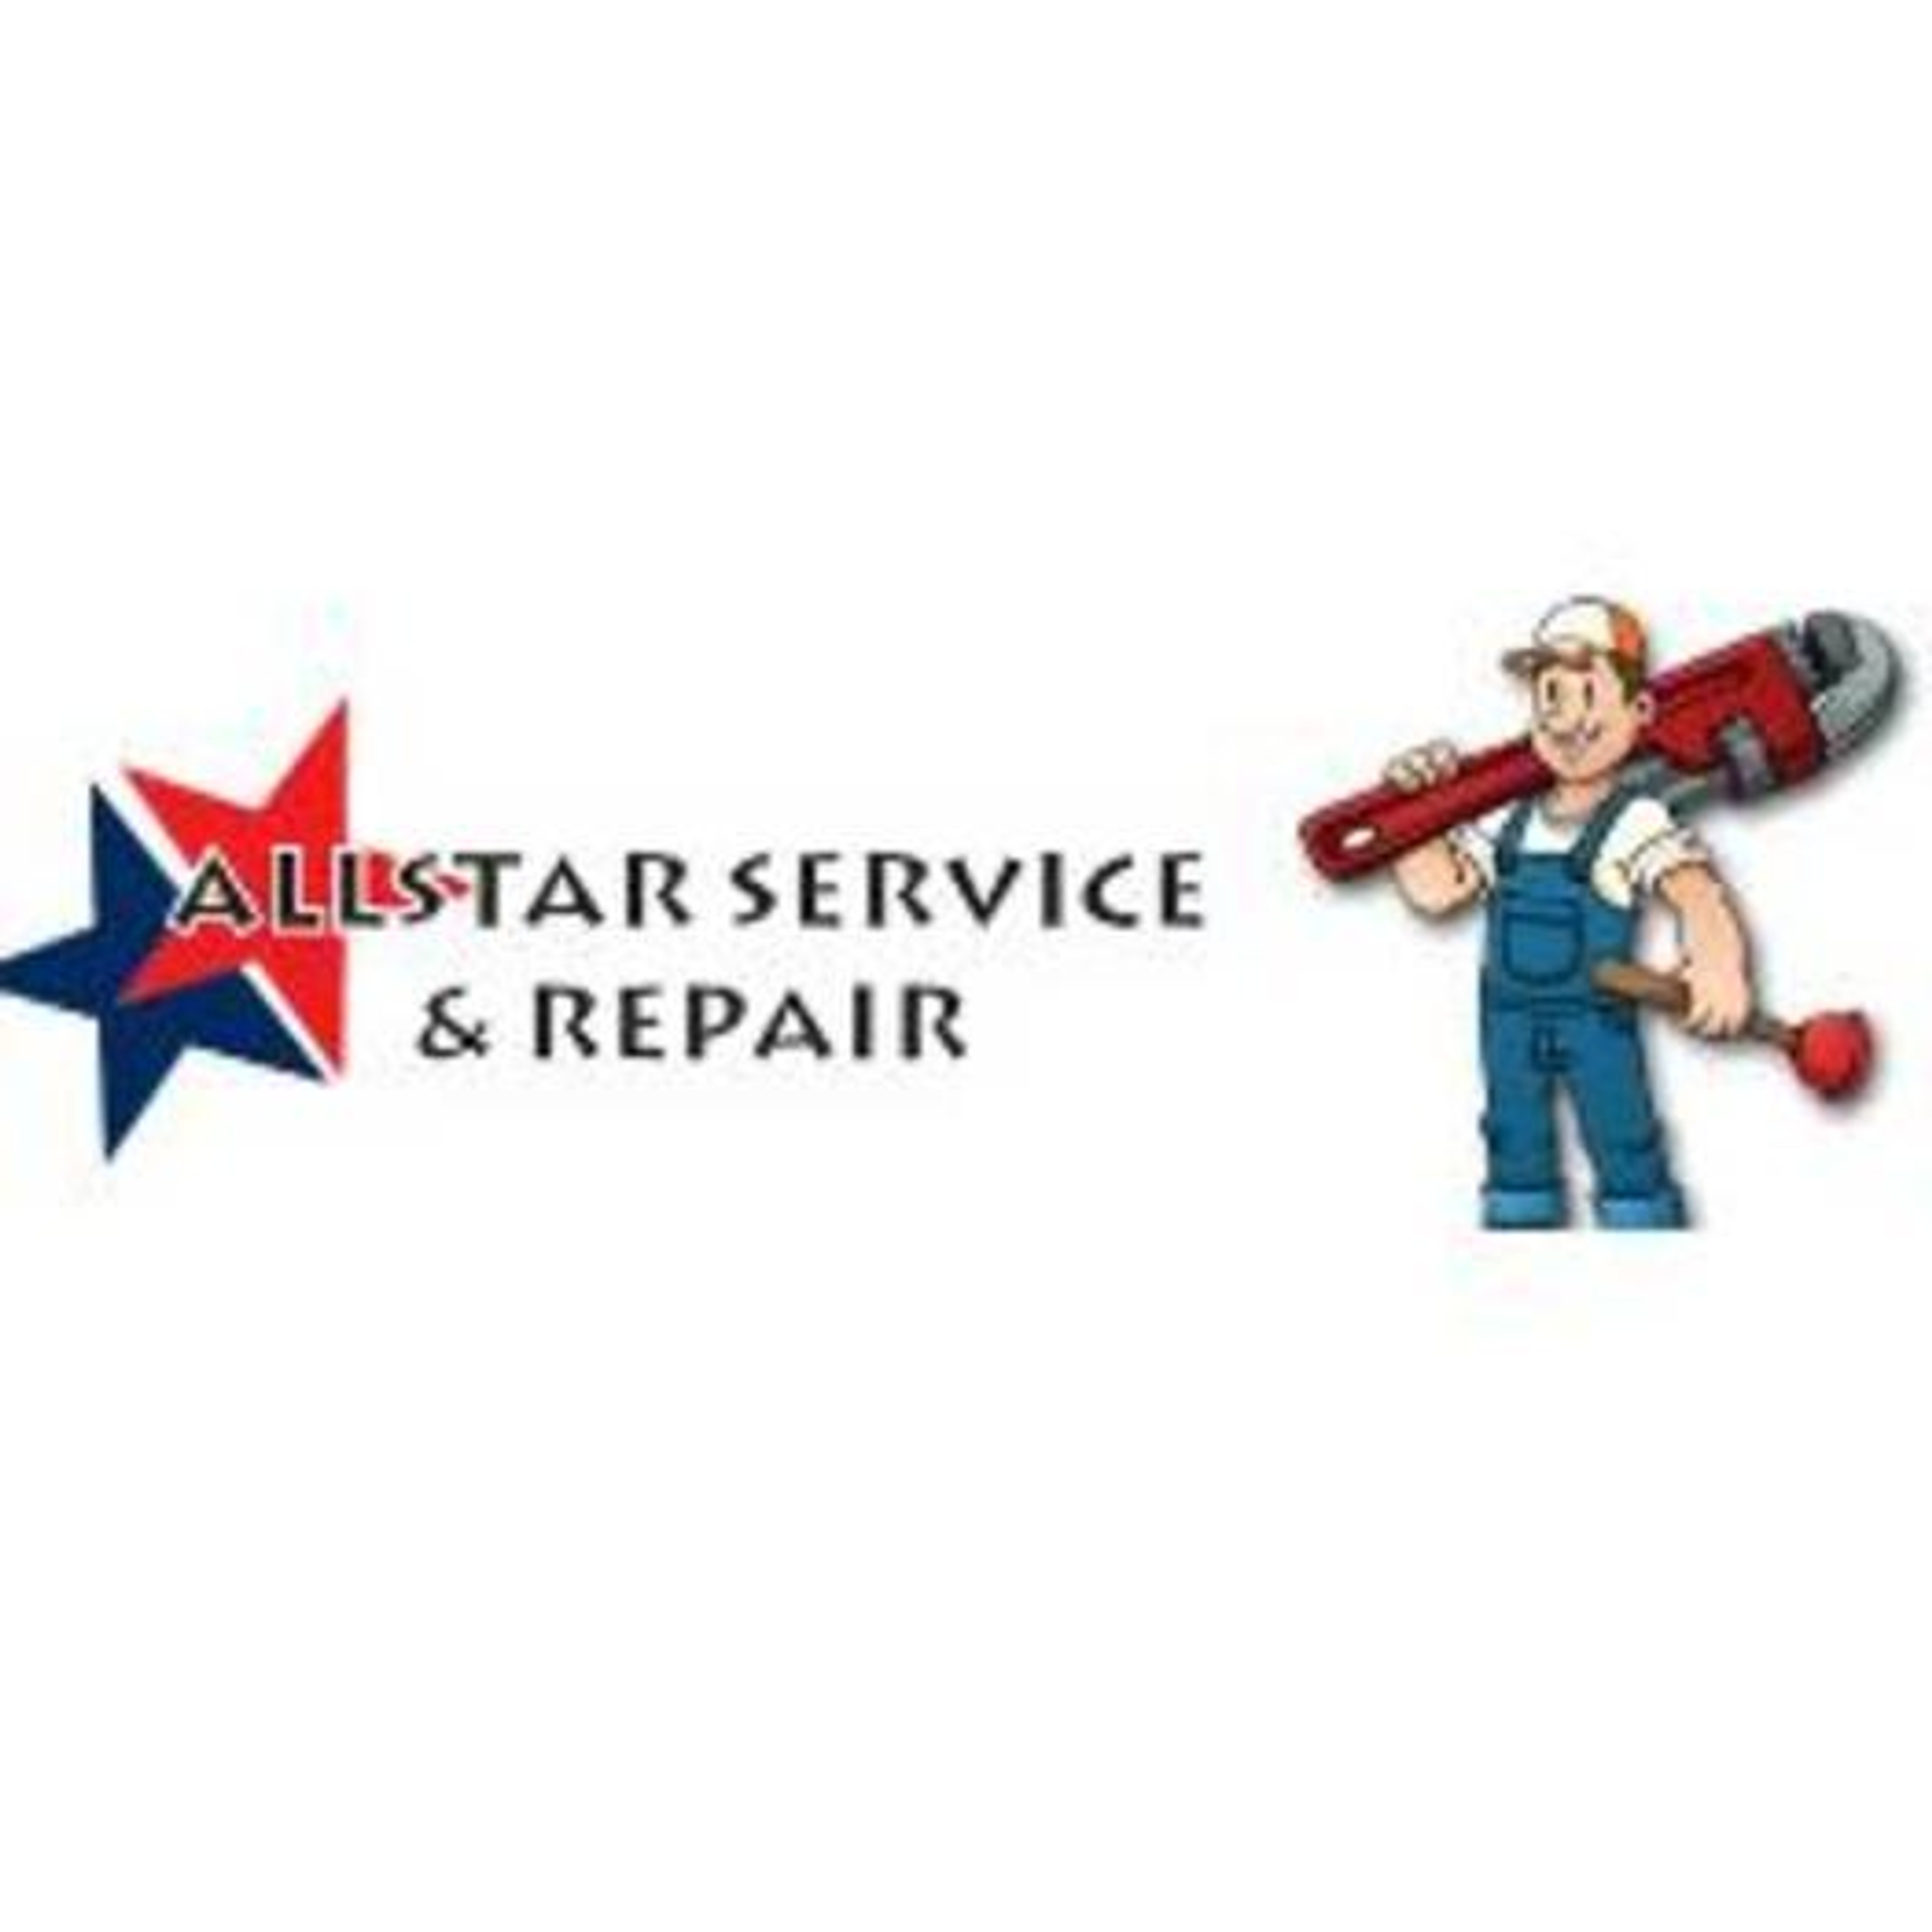 All Star Service and Repair